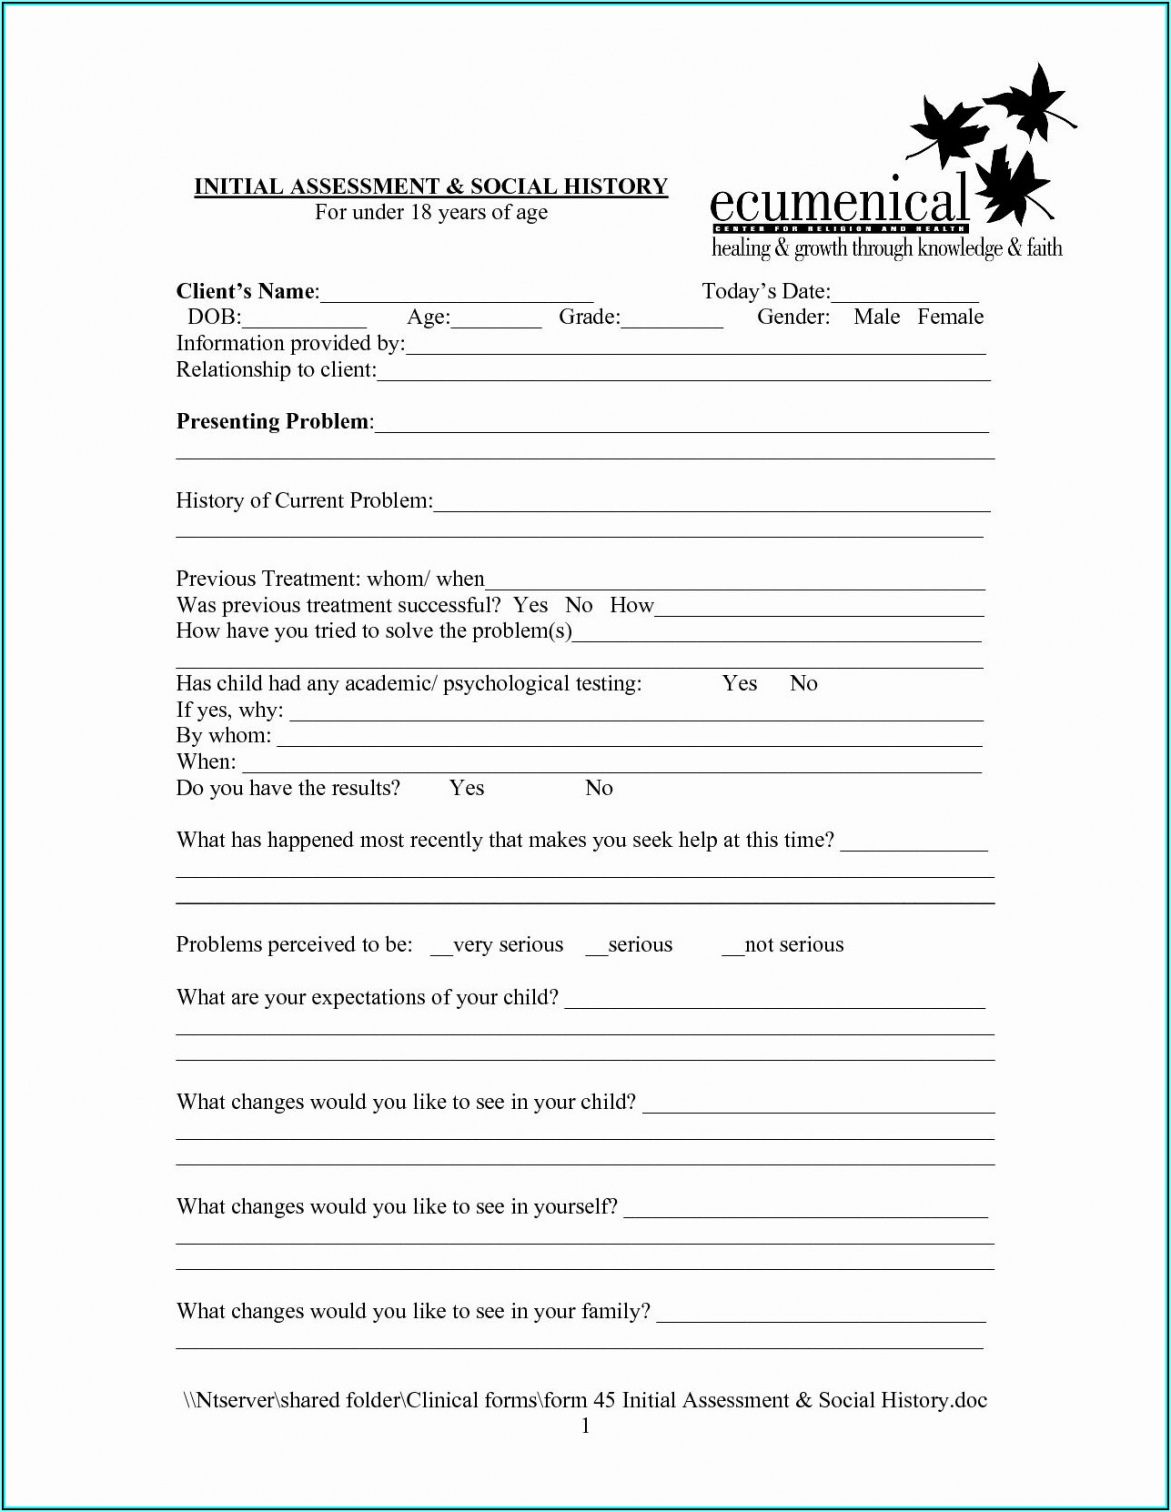 Free Tax Client Intake Form Template Doc Example